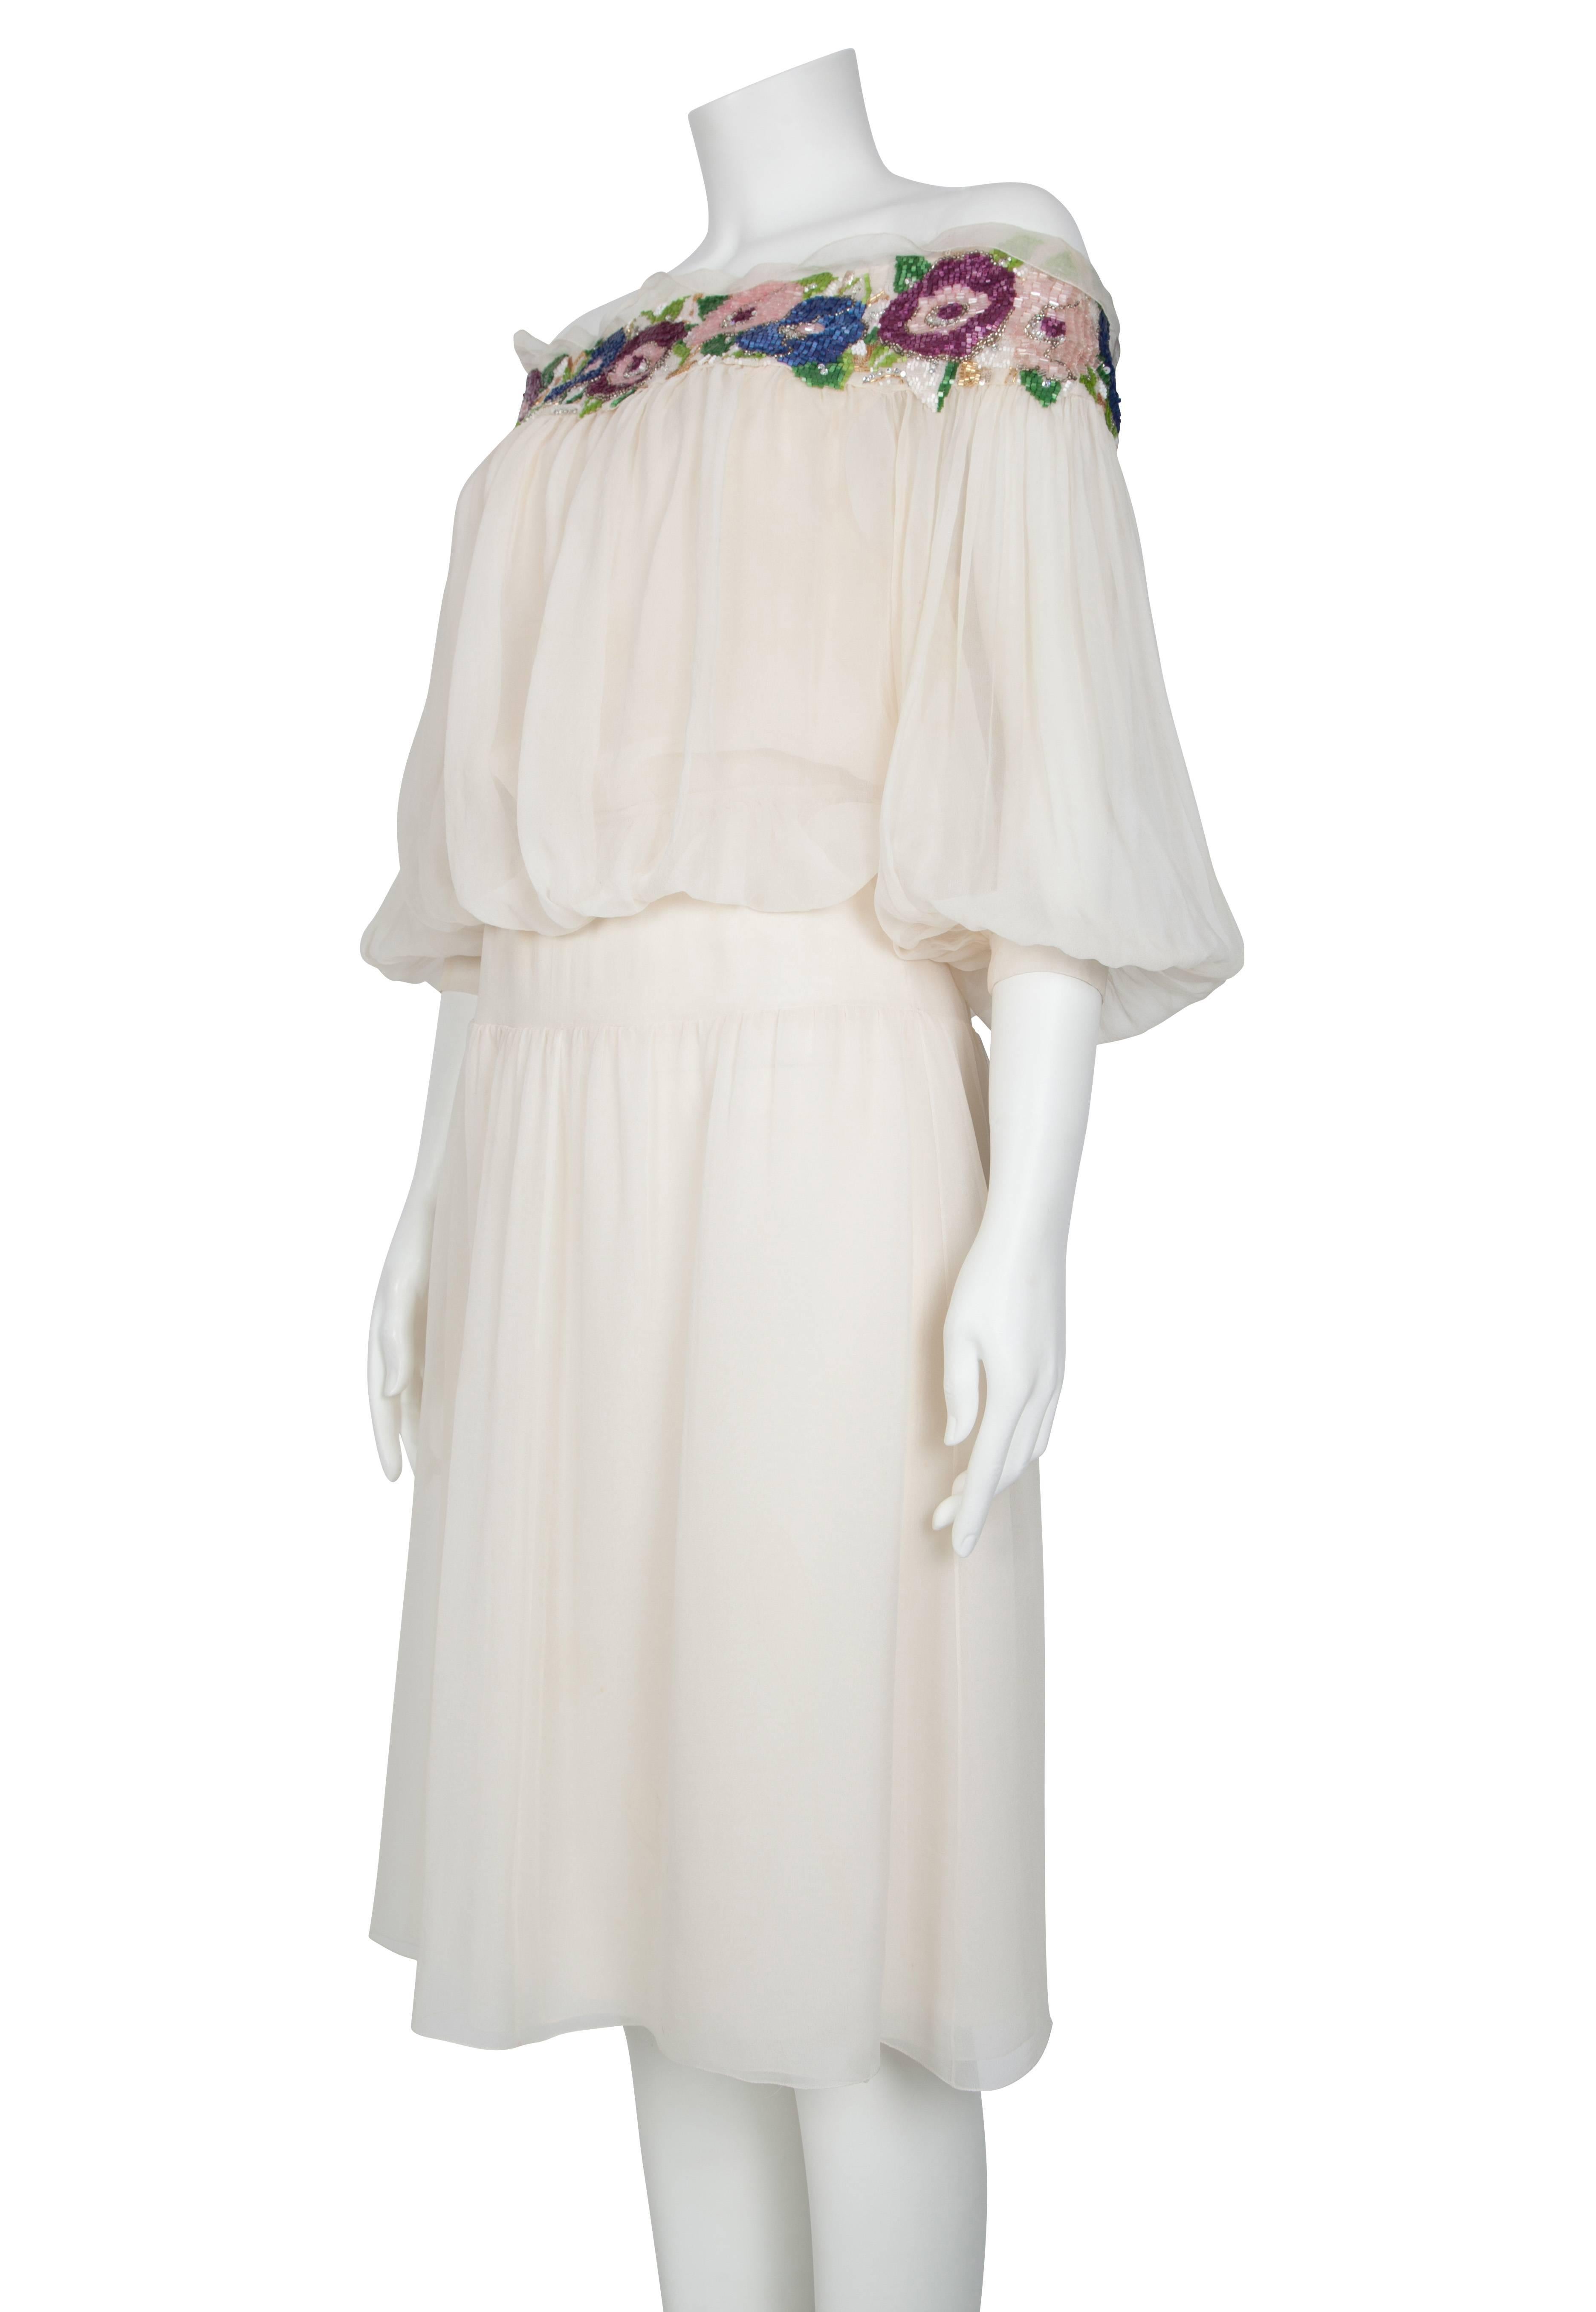 1980's Christian Dior Ivory Chiffon Dress with Floral Beaded Collar For Sale 1